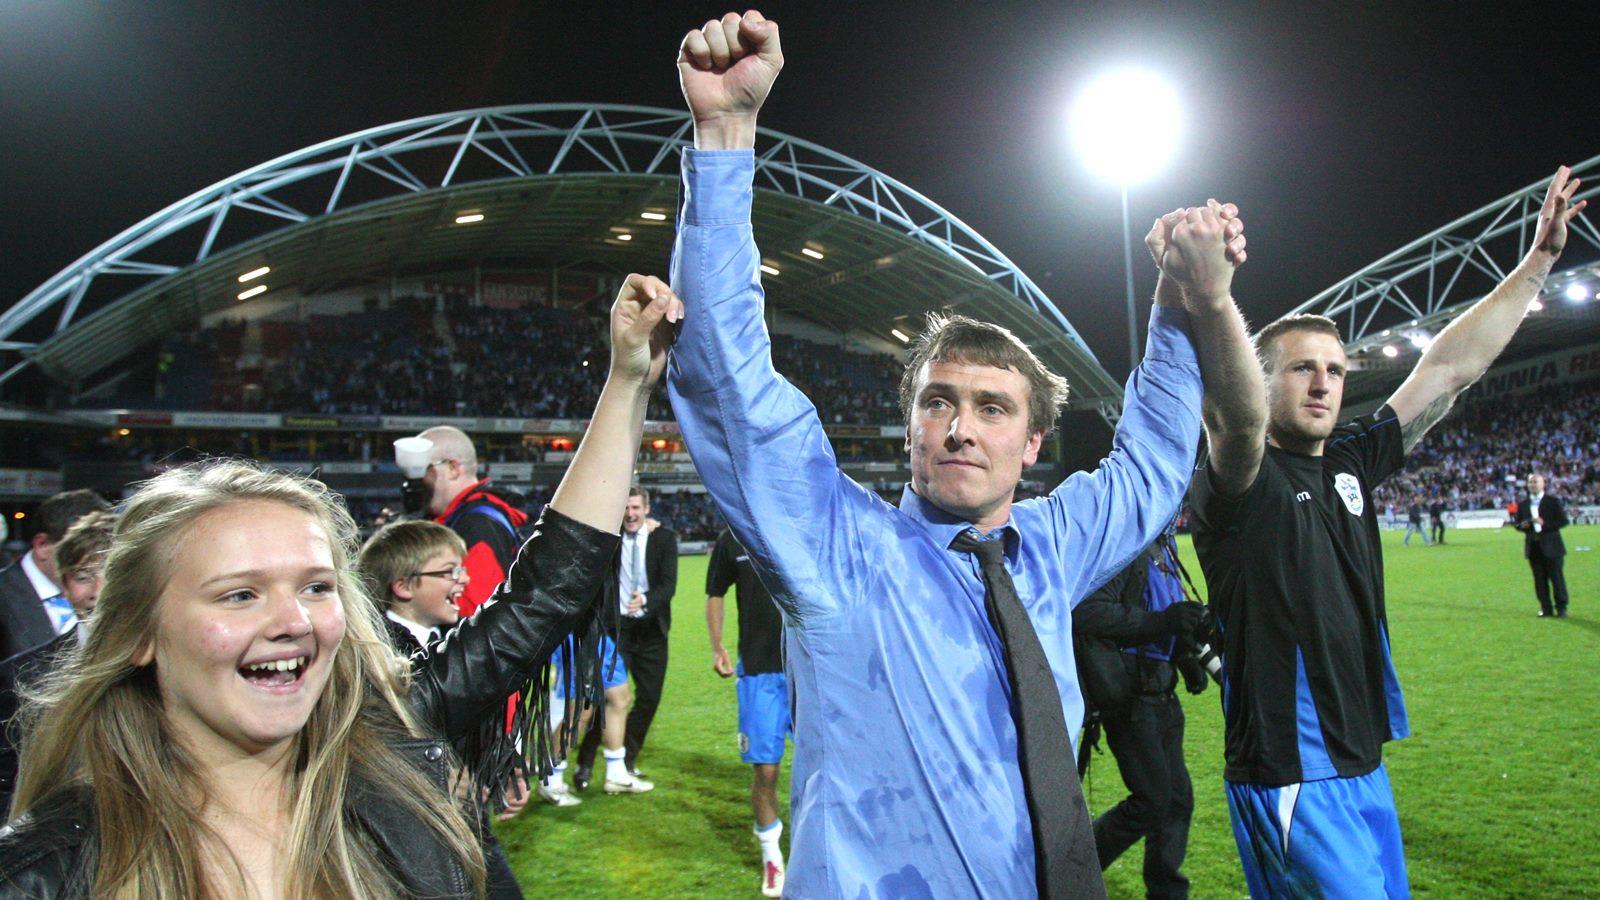 LEE CLARK BOOK SIGNING AT STADIUM SUPERSTORE - News - Huddersfield Town